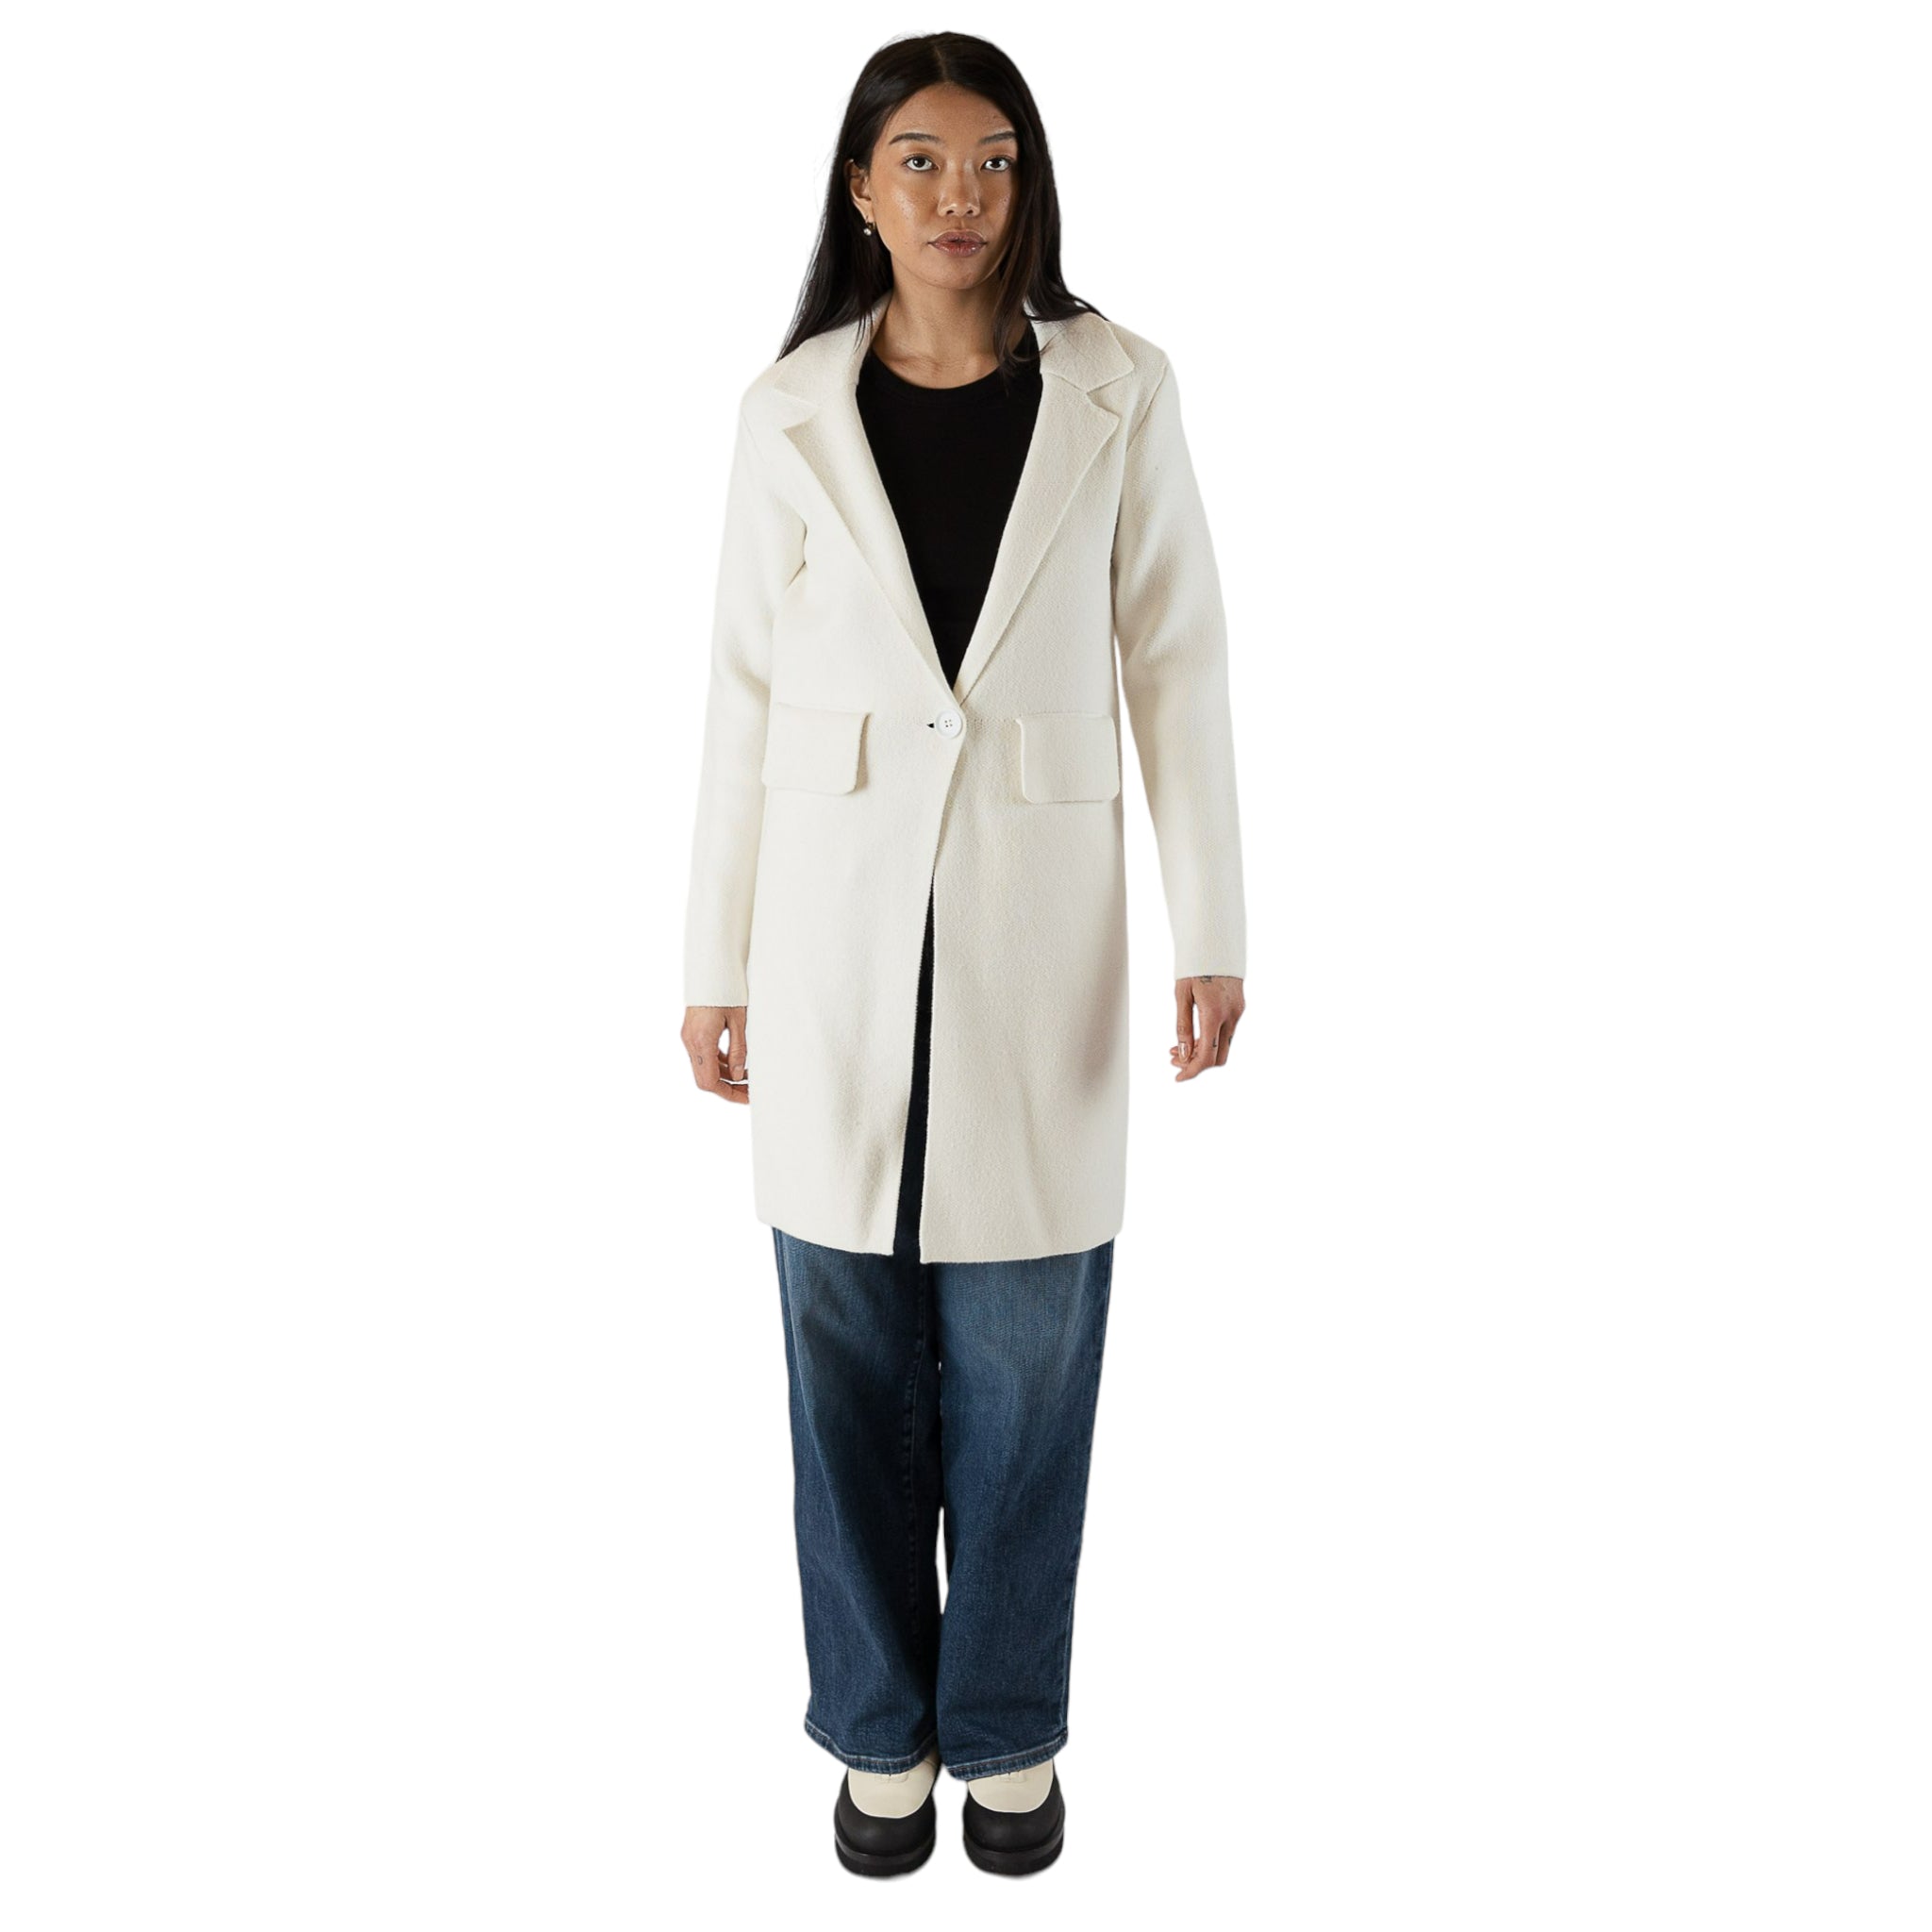 Fiona Collared Jacket Sweater with Pockets in Ivory-Veri Peri